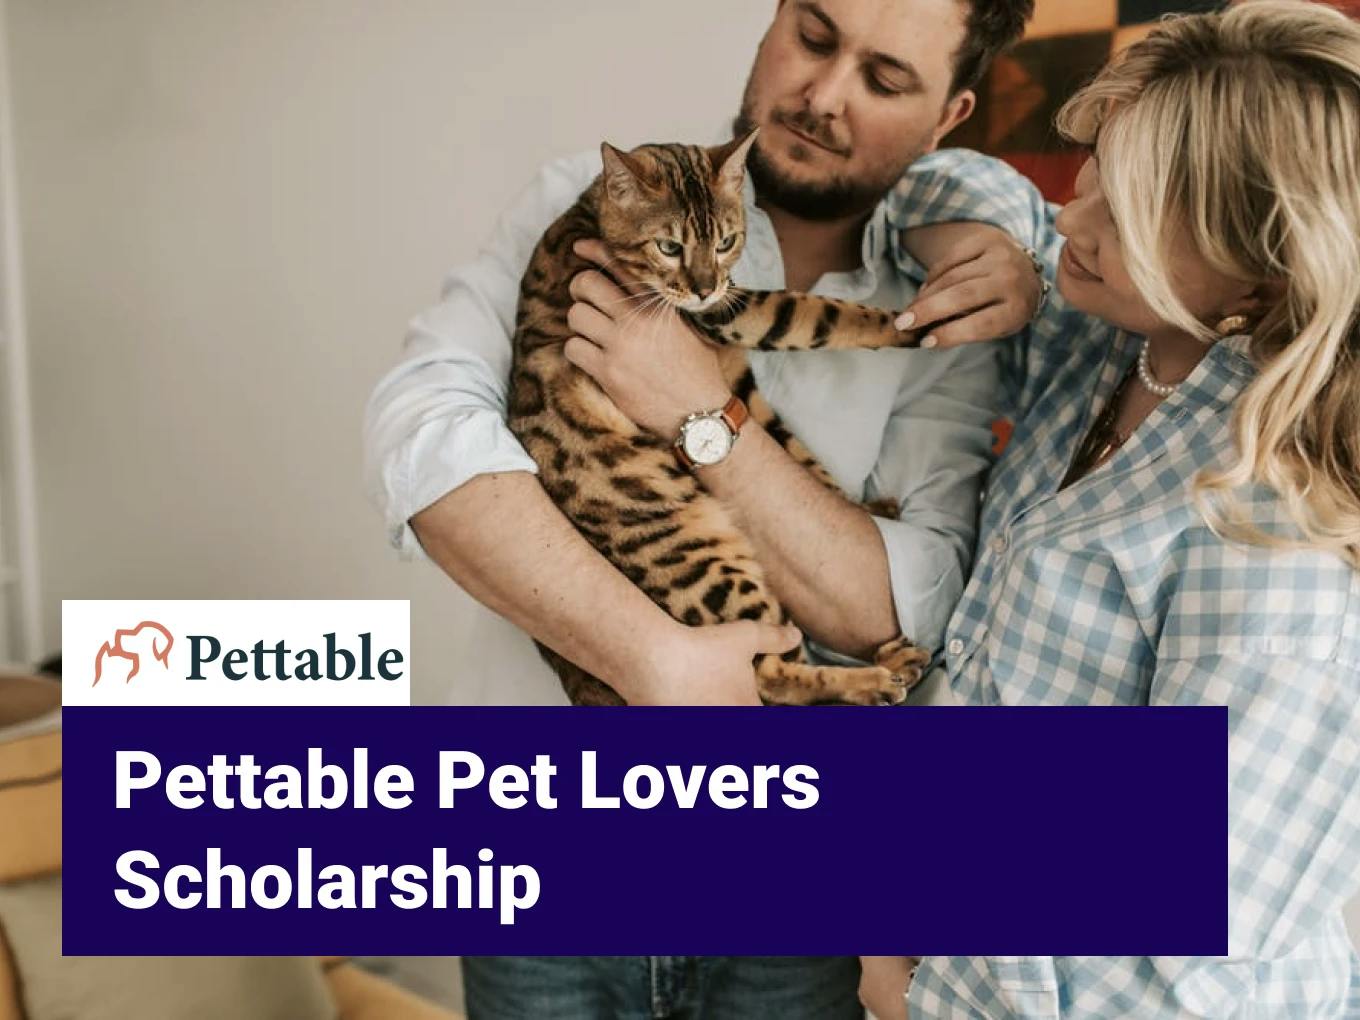 Pettable Pet Lovers Scholarship Fund